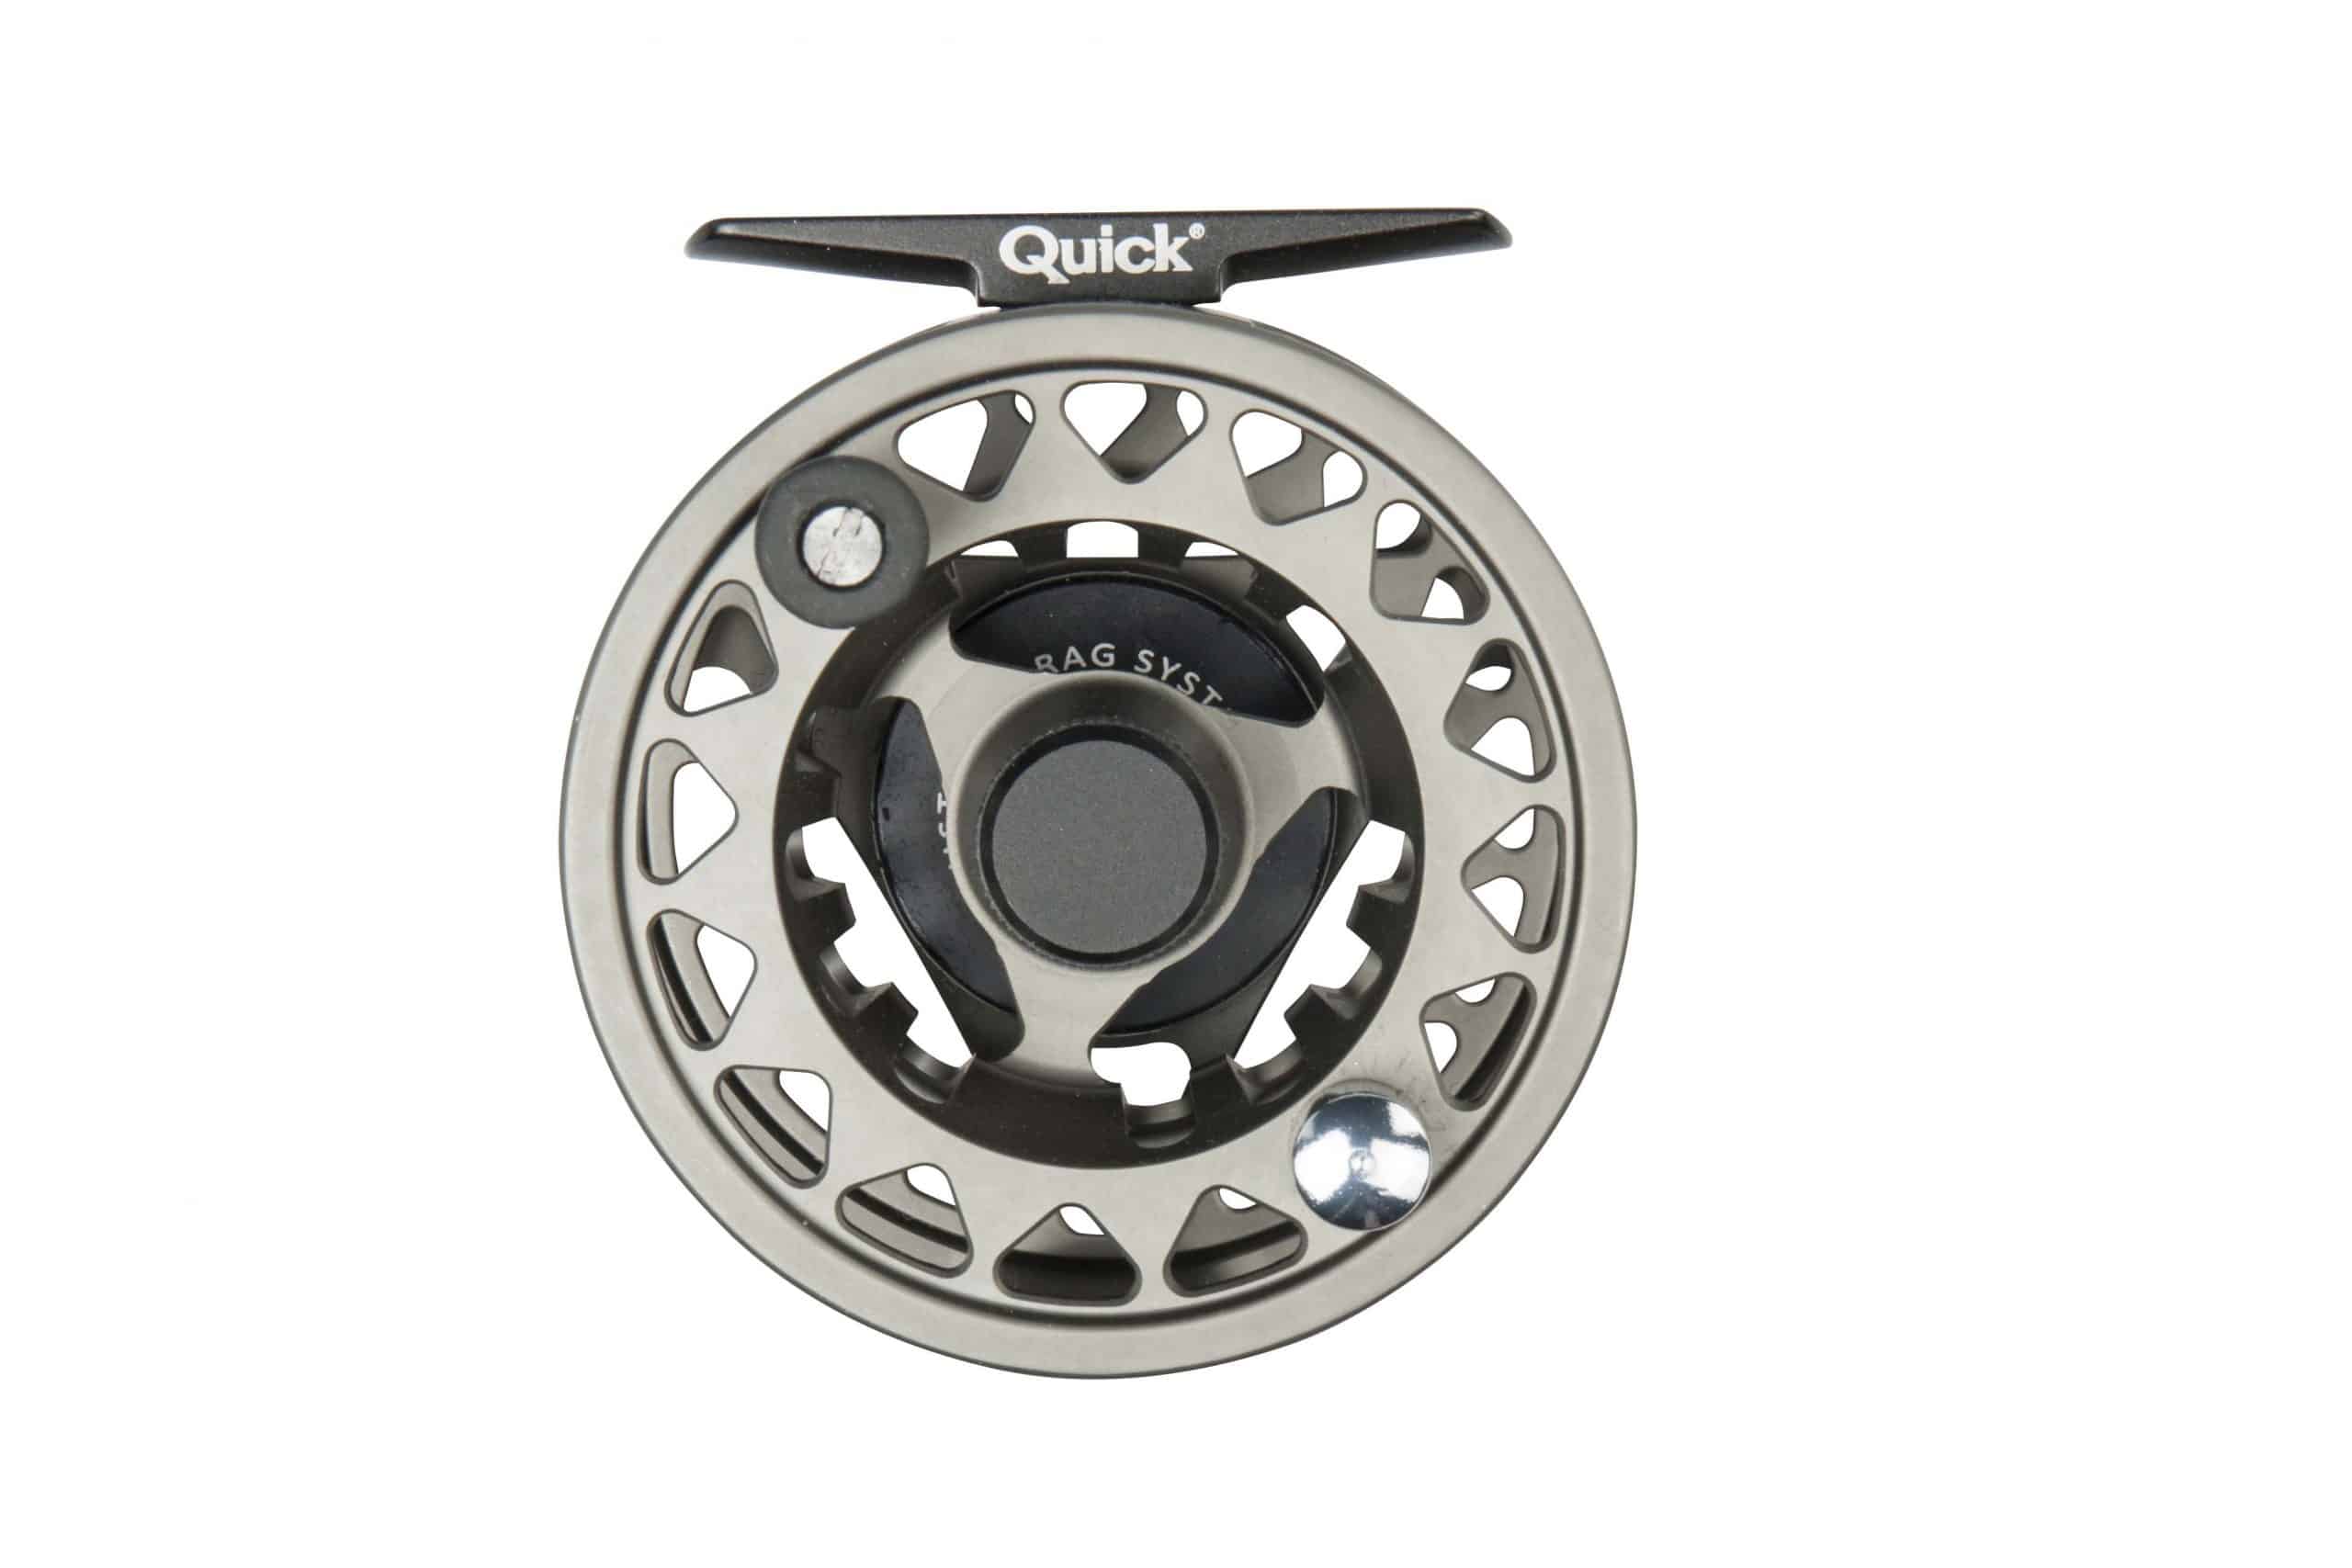 Dam Quick G-Fly - Fly Fishing Trout & Salmon Fishing Reels